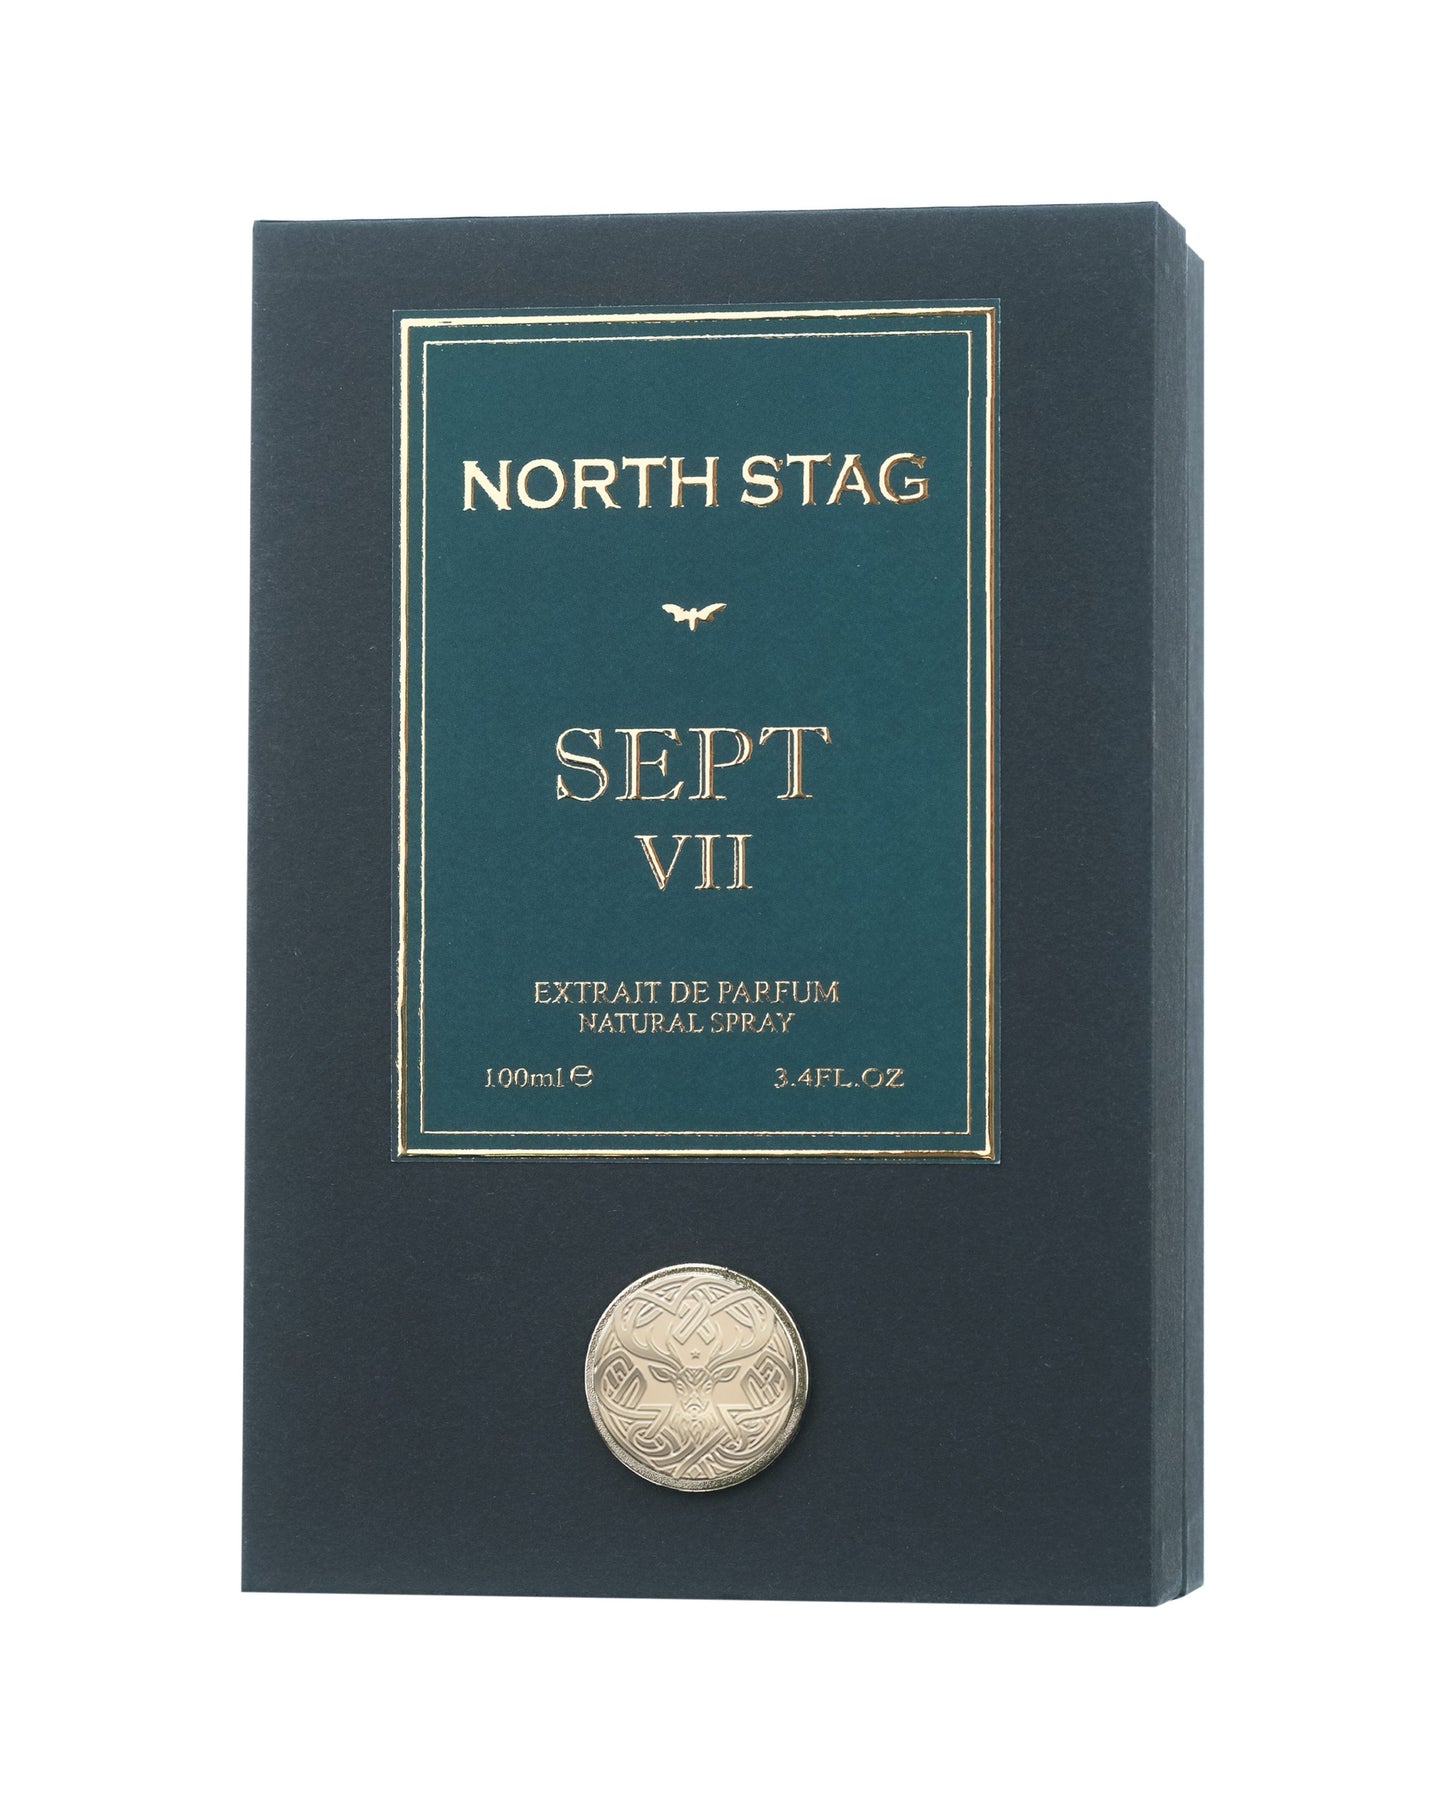 NORTH STAG SEPT VII